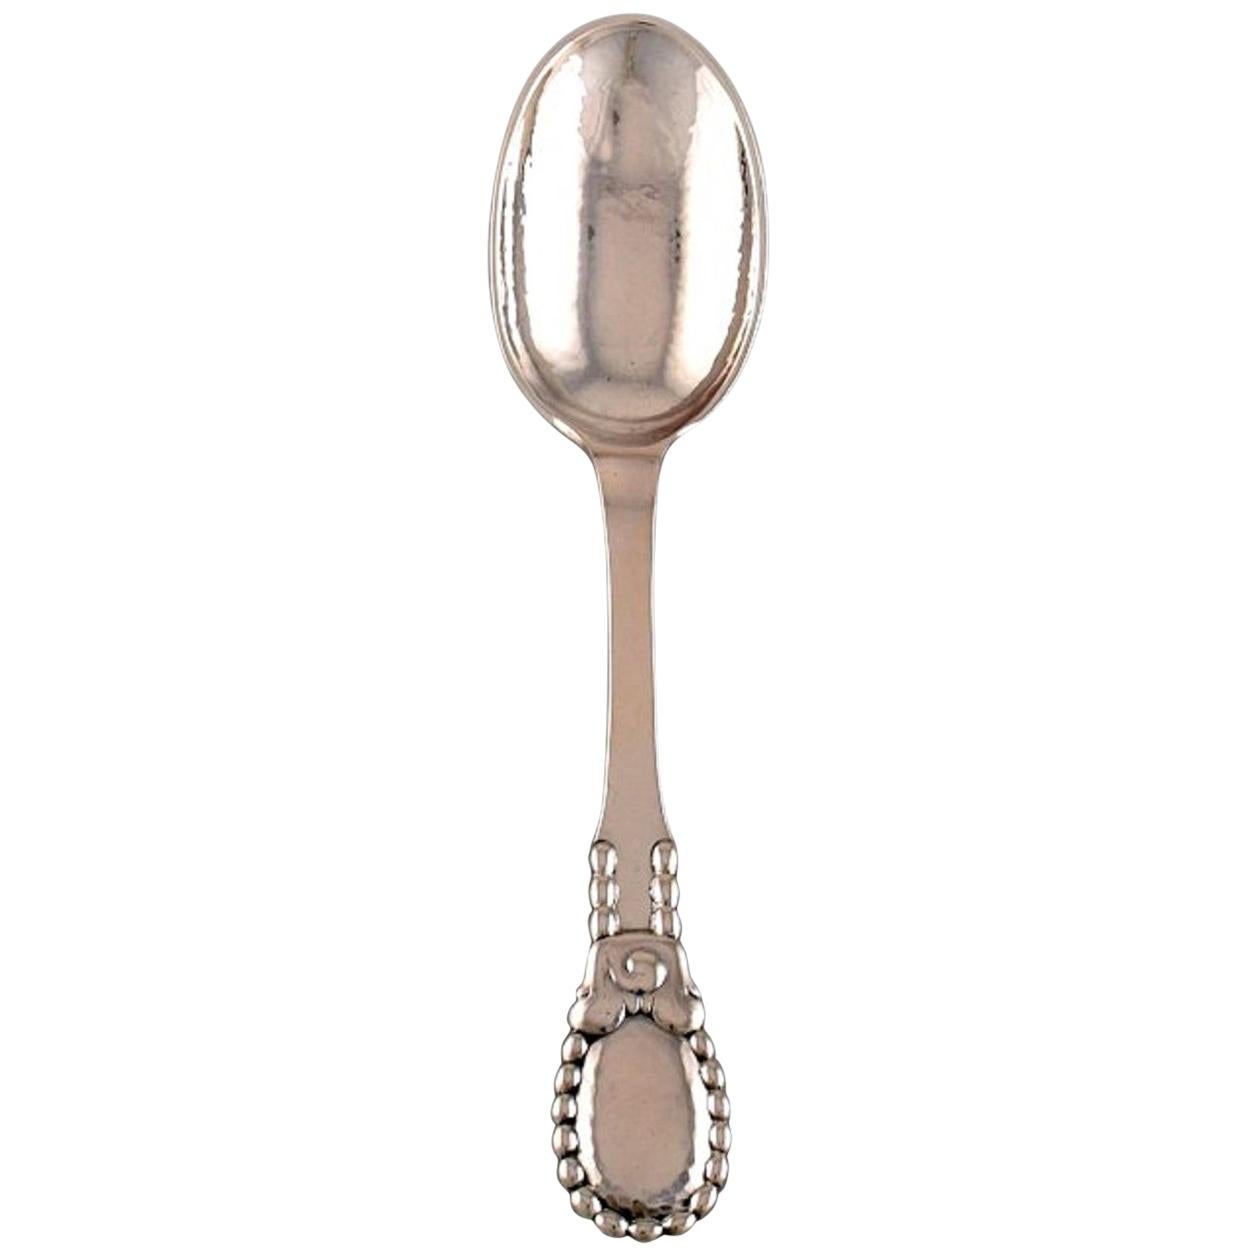 Evald Nielsen Number 13 Large Tablespoon in Hammered Silver, 1920's